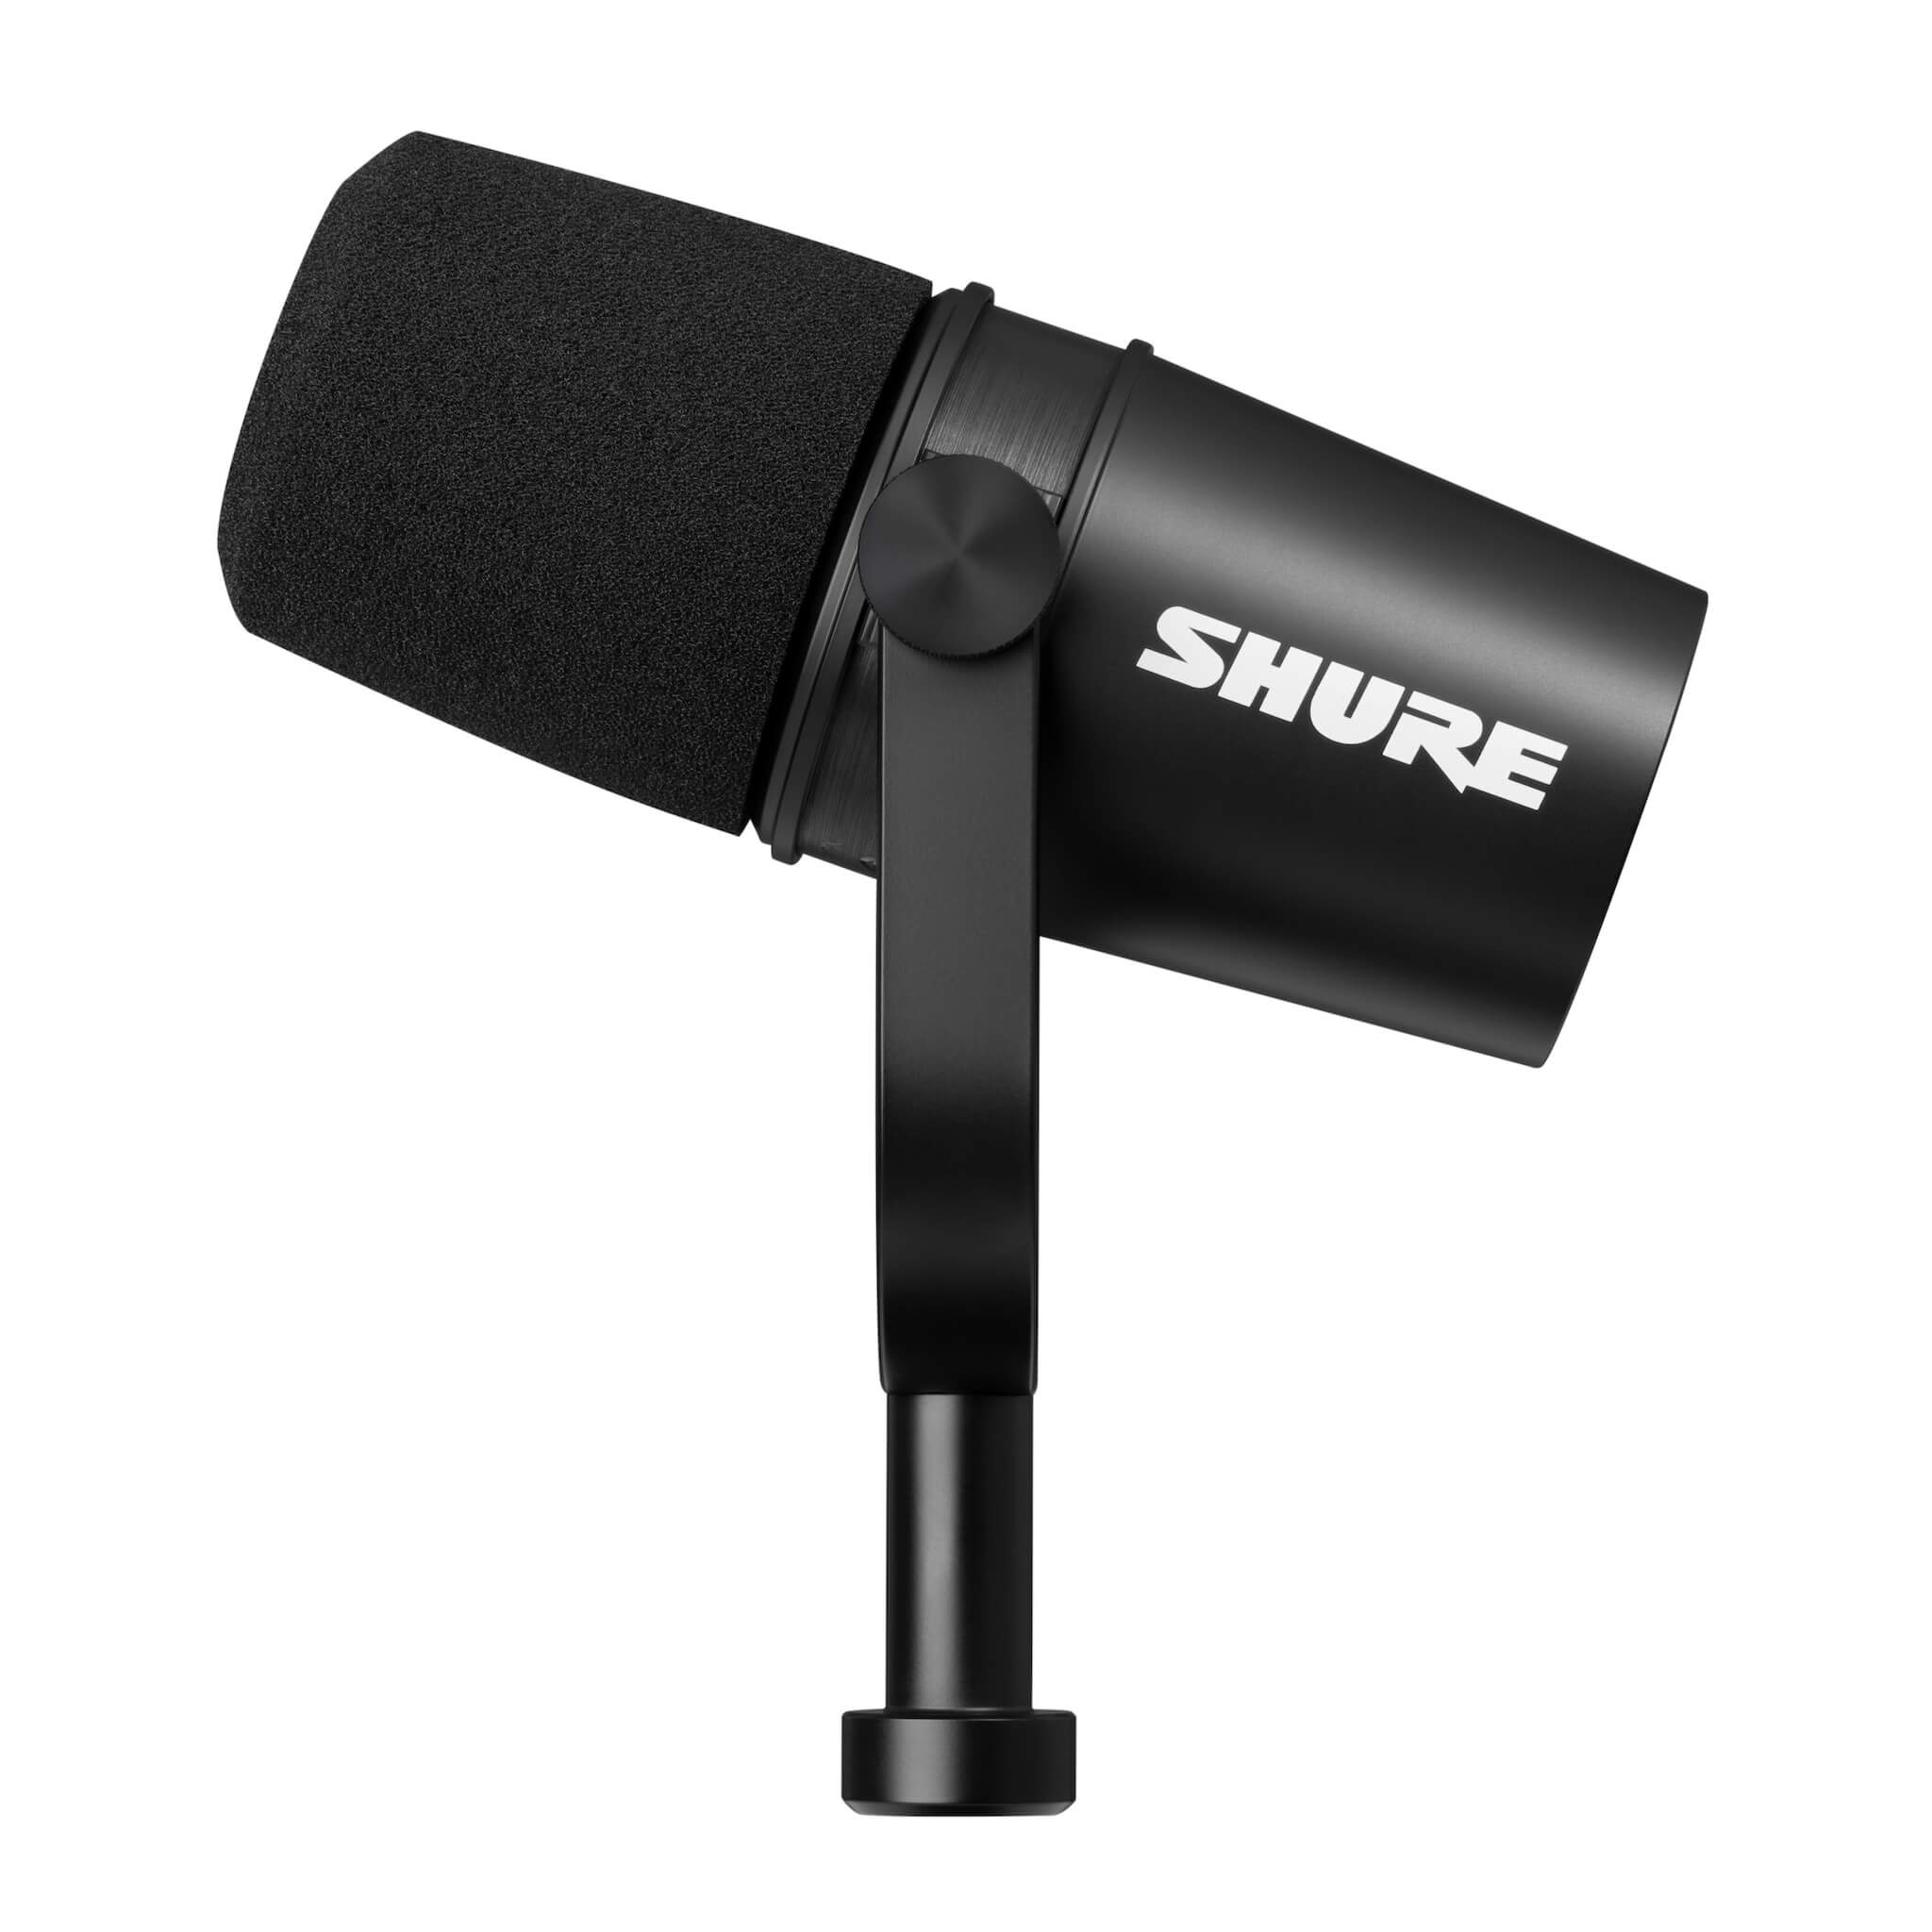 Shure MV7X - Podcast Microphone with XLR Output